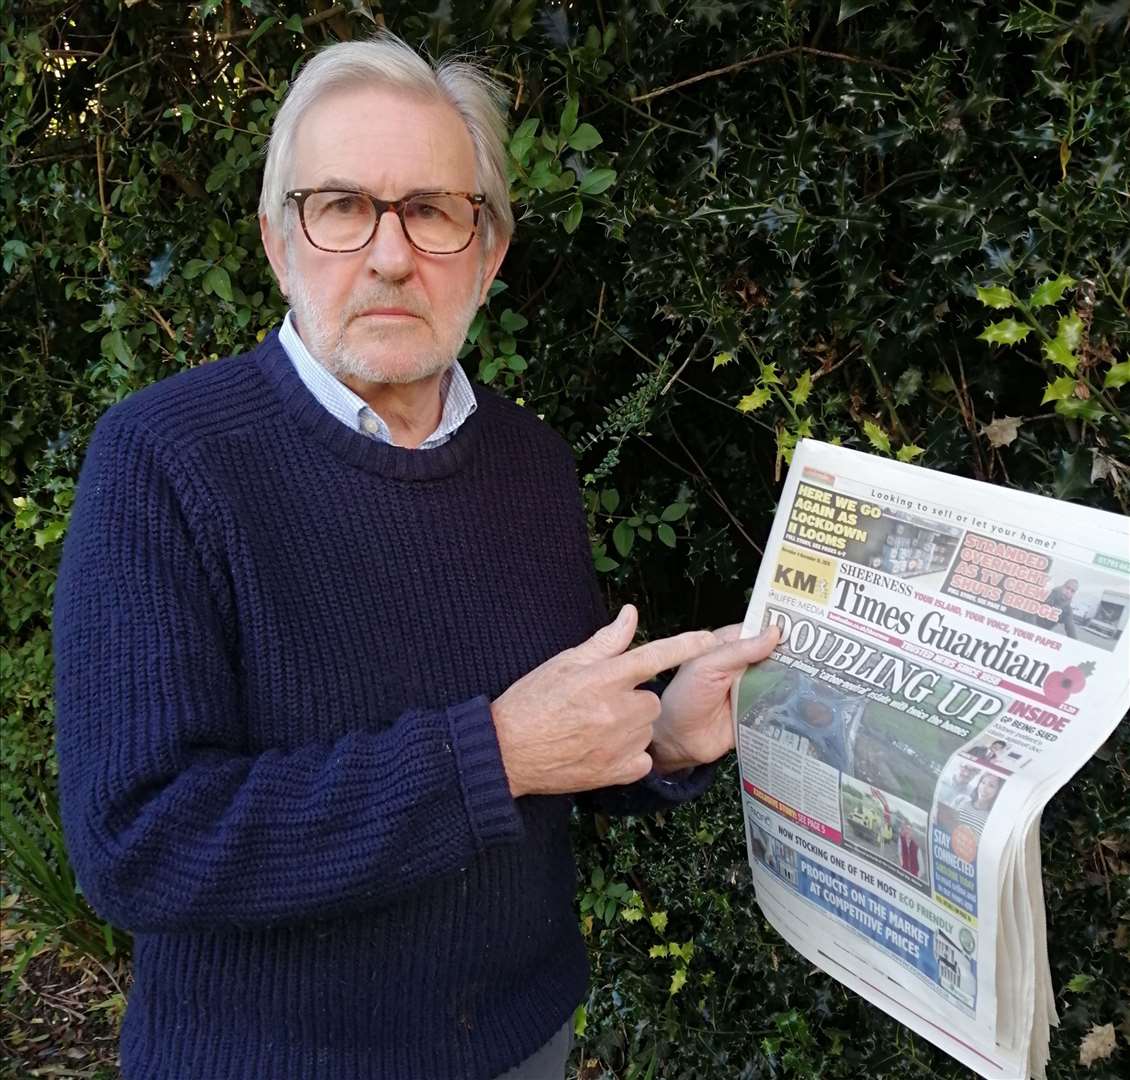 Retried newspaper editor David Jones of Minster, Sheppey, with a copy of the Sheerness Times Guardian (43019606)